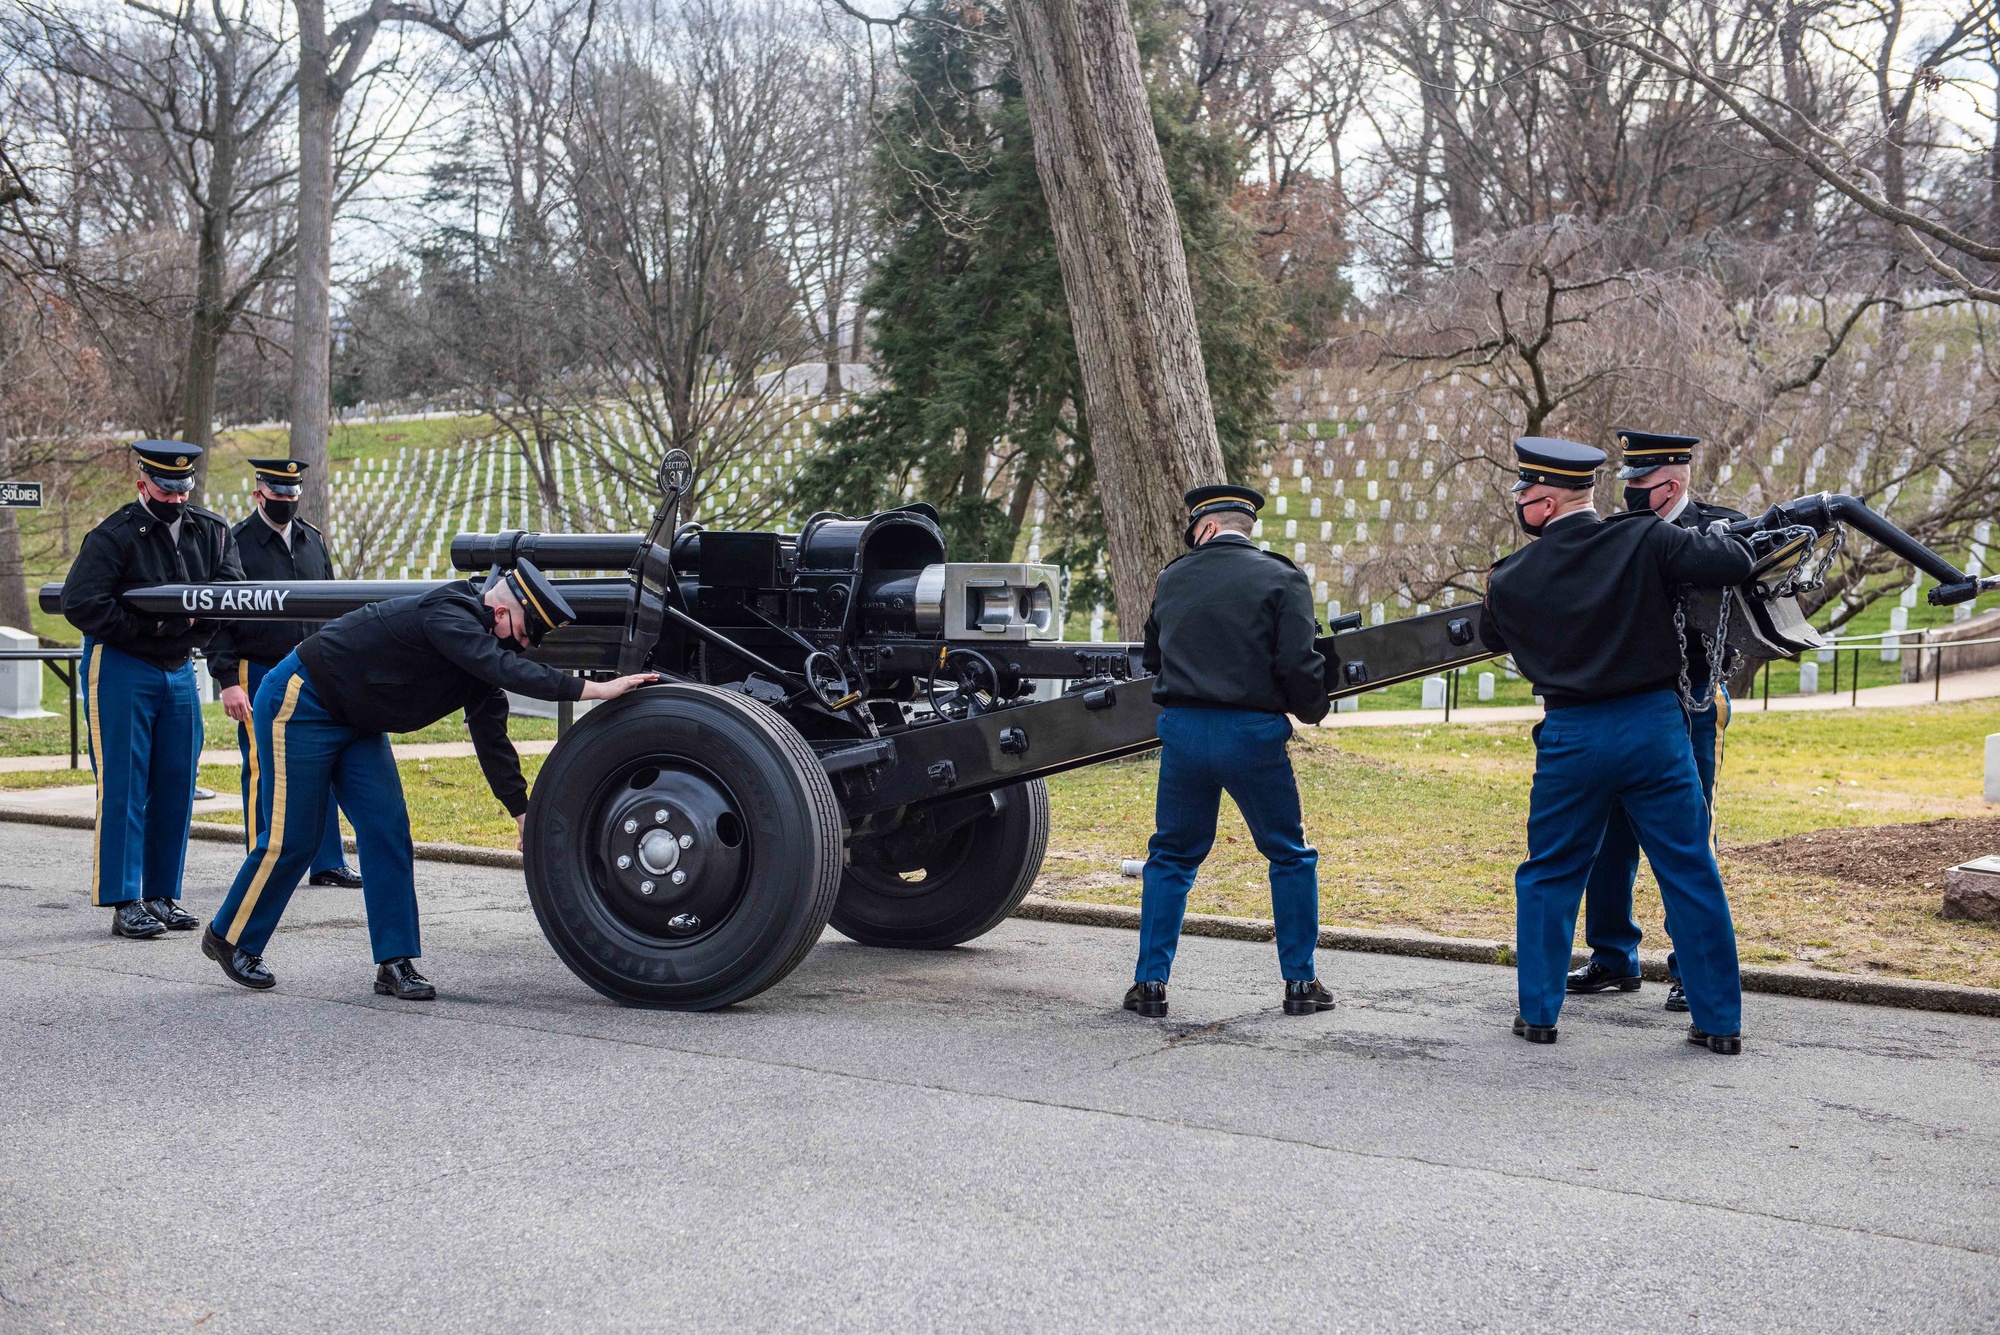 DVIDS - News - Presidential Salute Battery prepares to render highest honor  for 2017 Inauguration